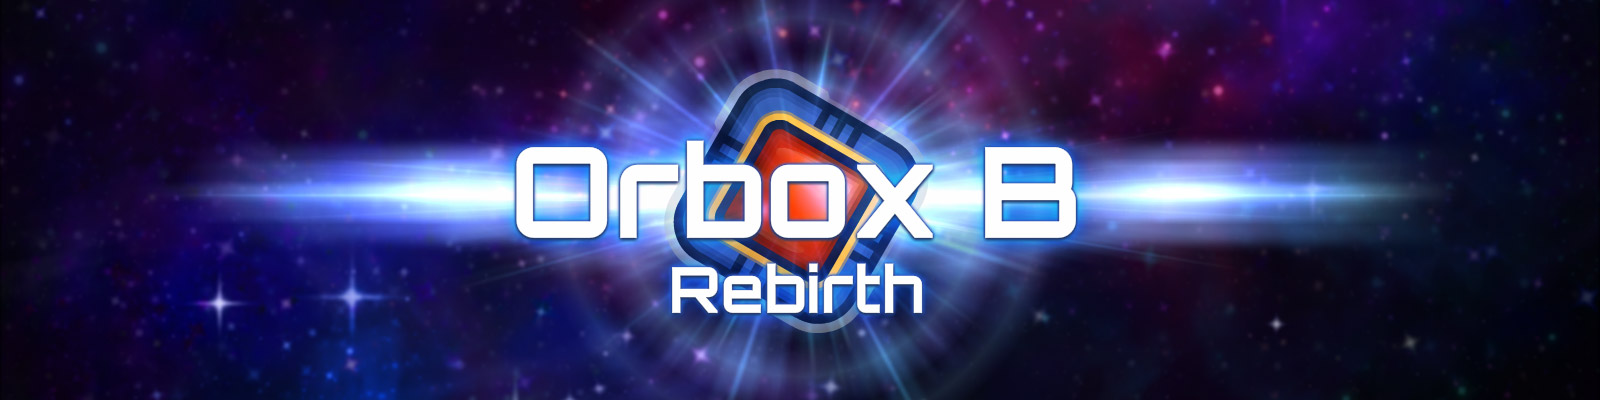 Orbox B: Rebirth - one of the best puzzle games